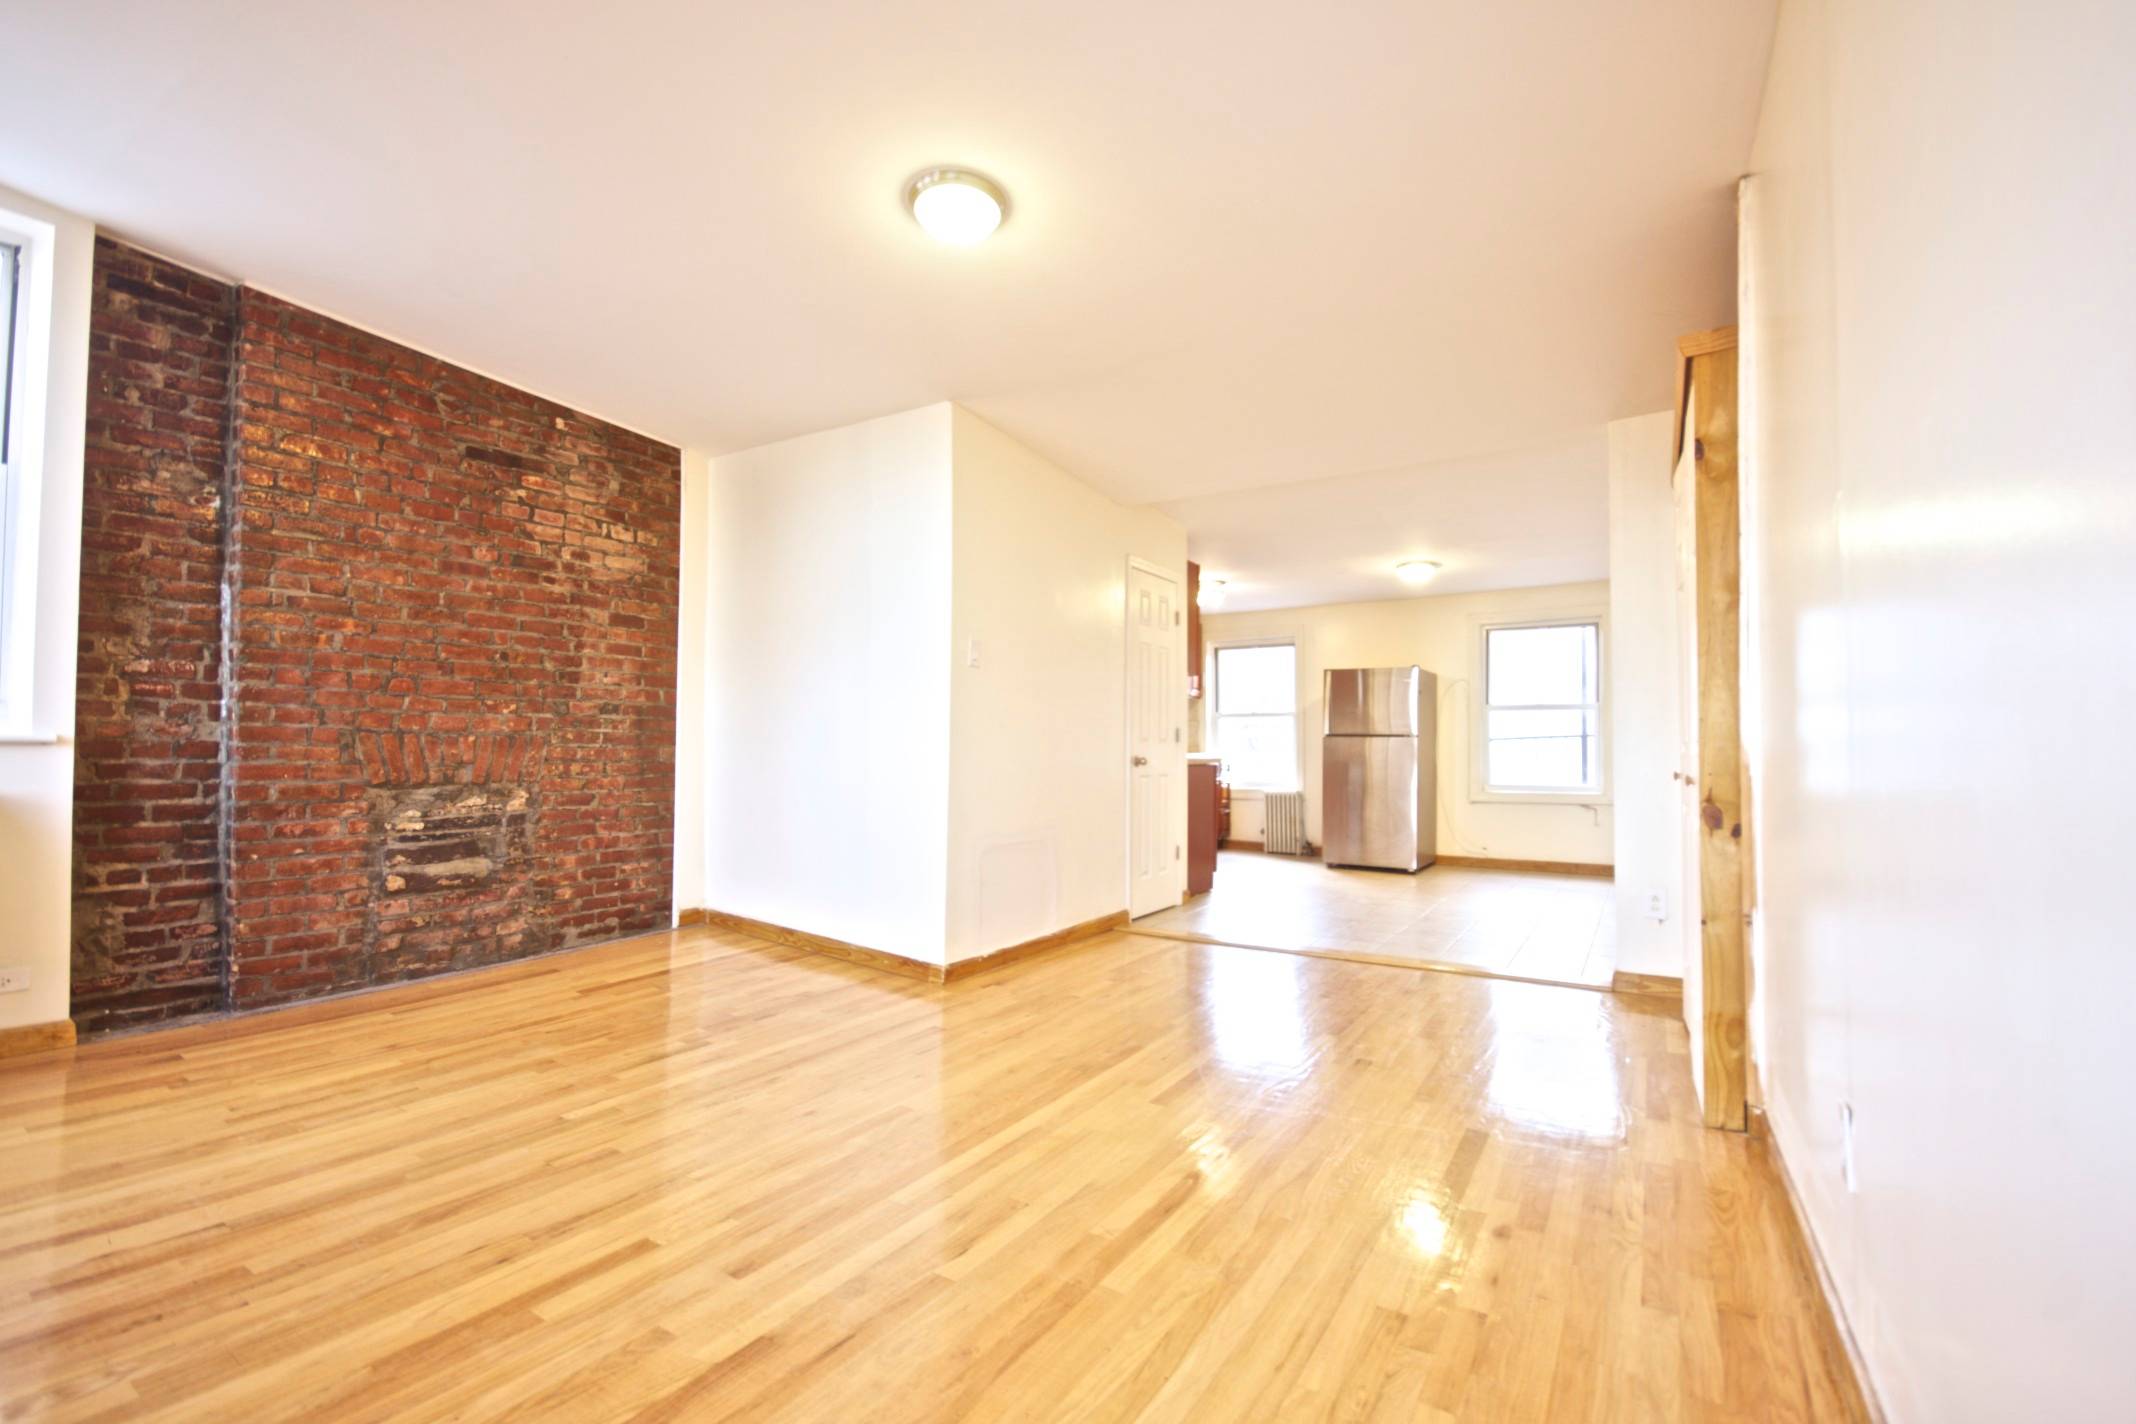 GIGANTIC FULL FLOOR, 2BR APARTMENT W/ EAT IN KITCHEN AND WINDOWS FOR DAYS!